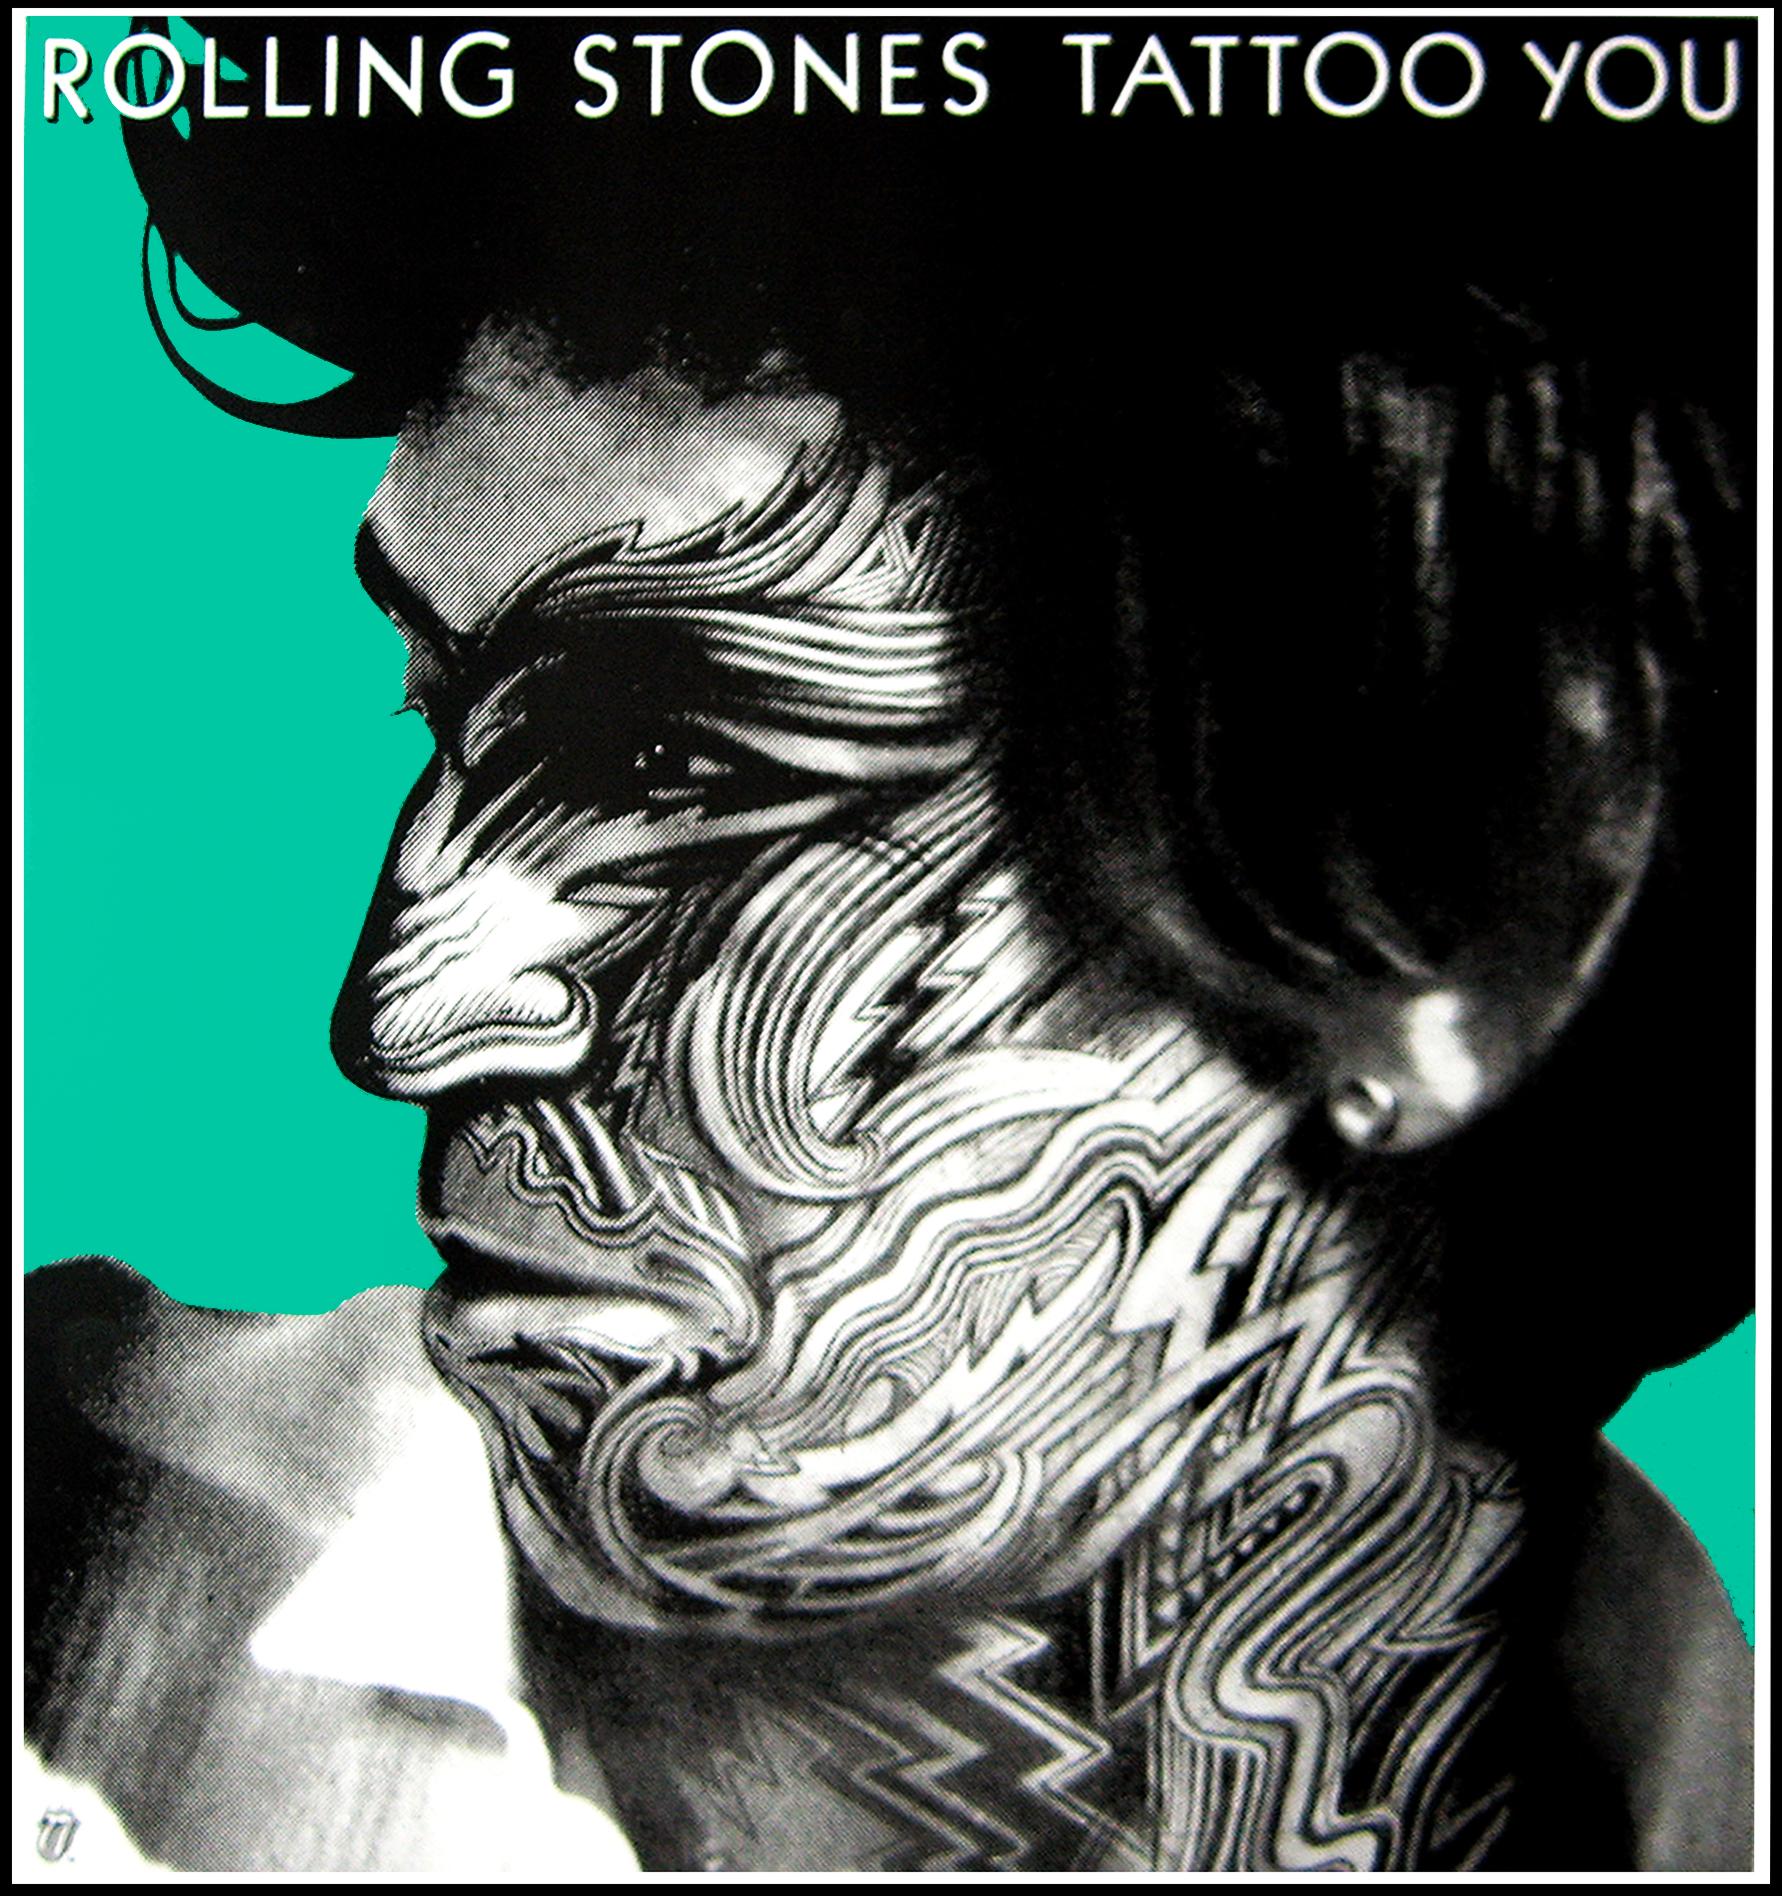 "Rolling Stones - Tattoo You (Keith Richards)" Original Vintage Music Poster - Print by Peter Corriston